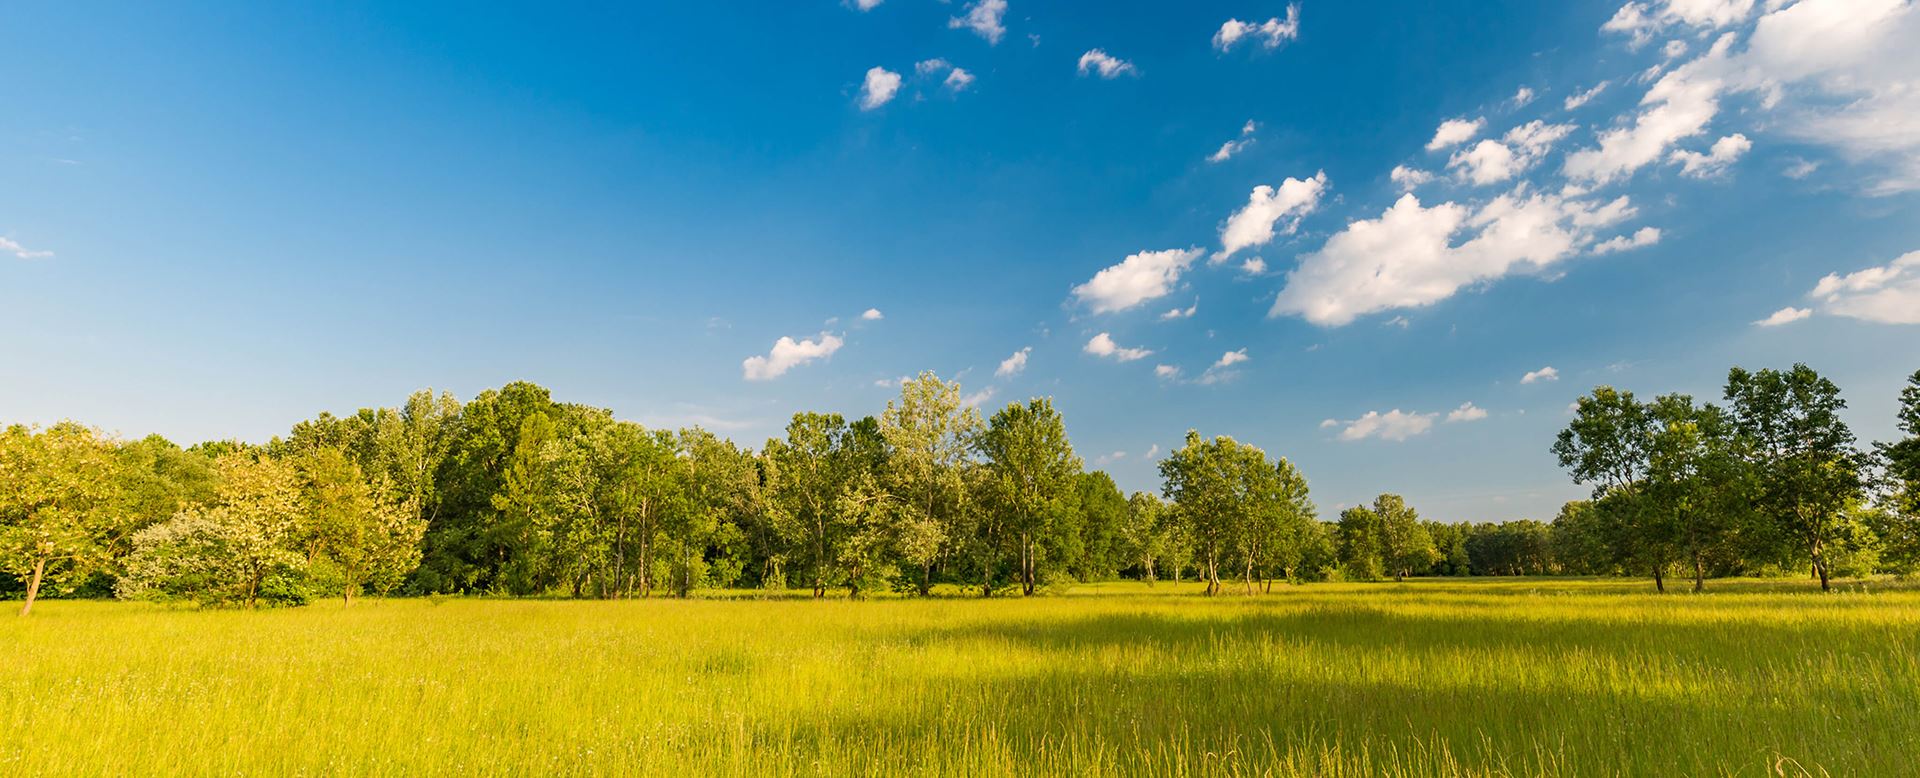 Open plain photo of grass and trees